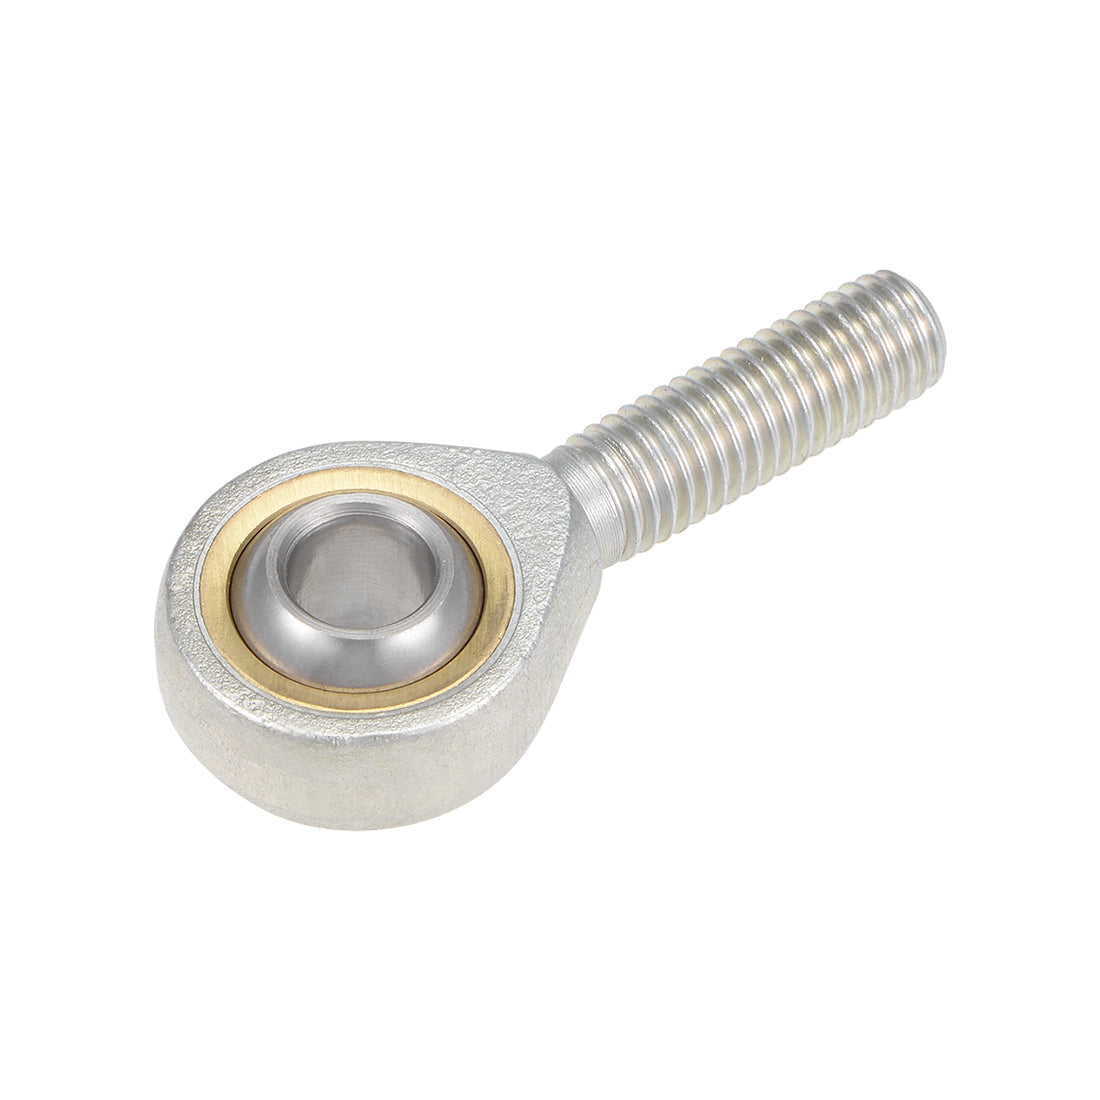 uxcell Uxcell 10mm Rod End Bearing M10x1.5mm Rod Ends Ball Joint Male Left Hand Thread